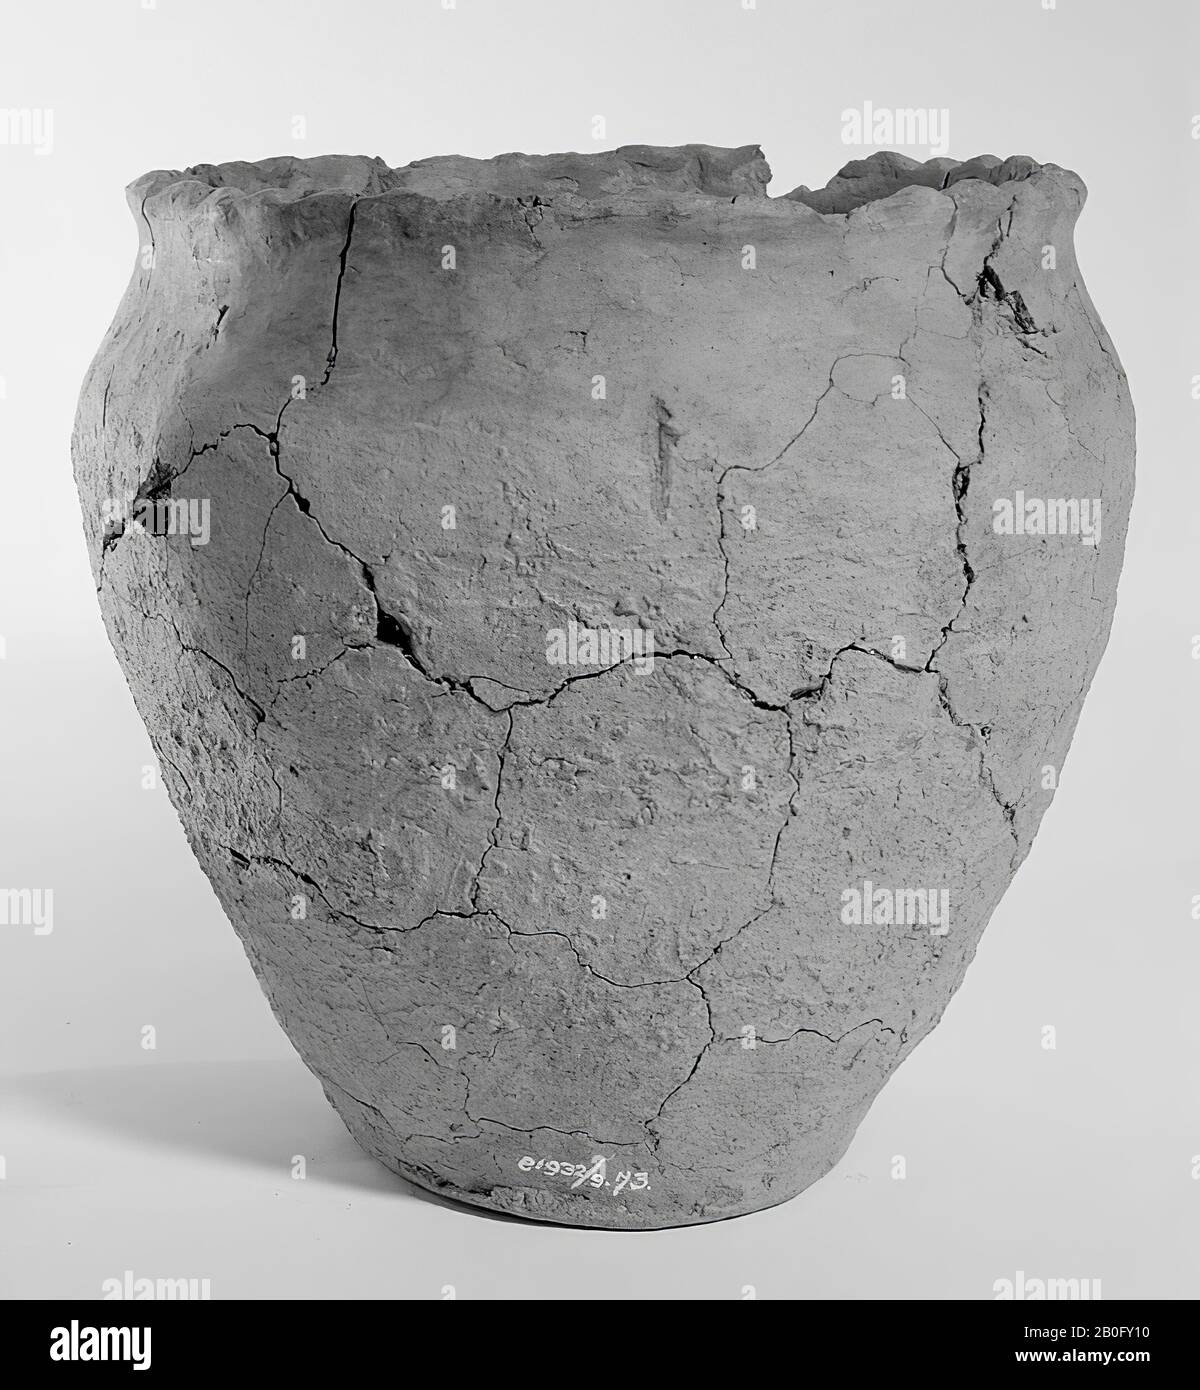 Germanic roundabout of earthenware. Unstable old bonding, cracks, the edge is damaged, surface damage. Contains cremated residues, urn, earthenware, h: 18 cm, diam: 18.5 cm, prehistory -1200 Stock Photo